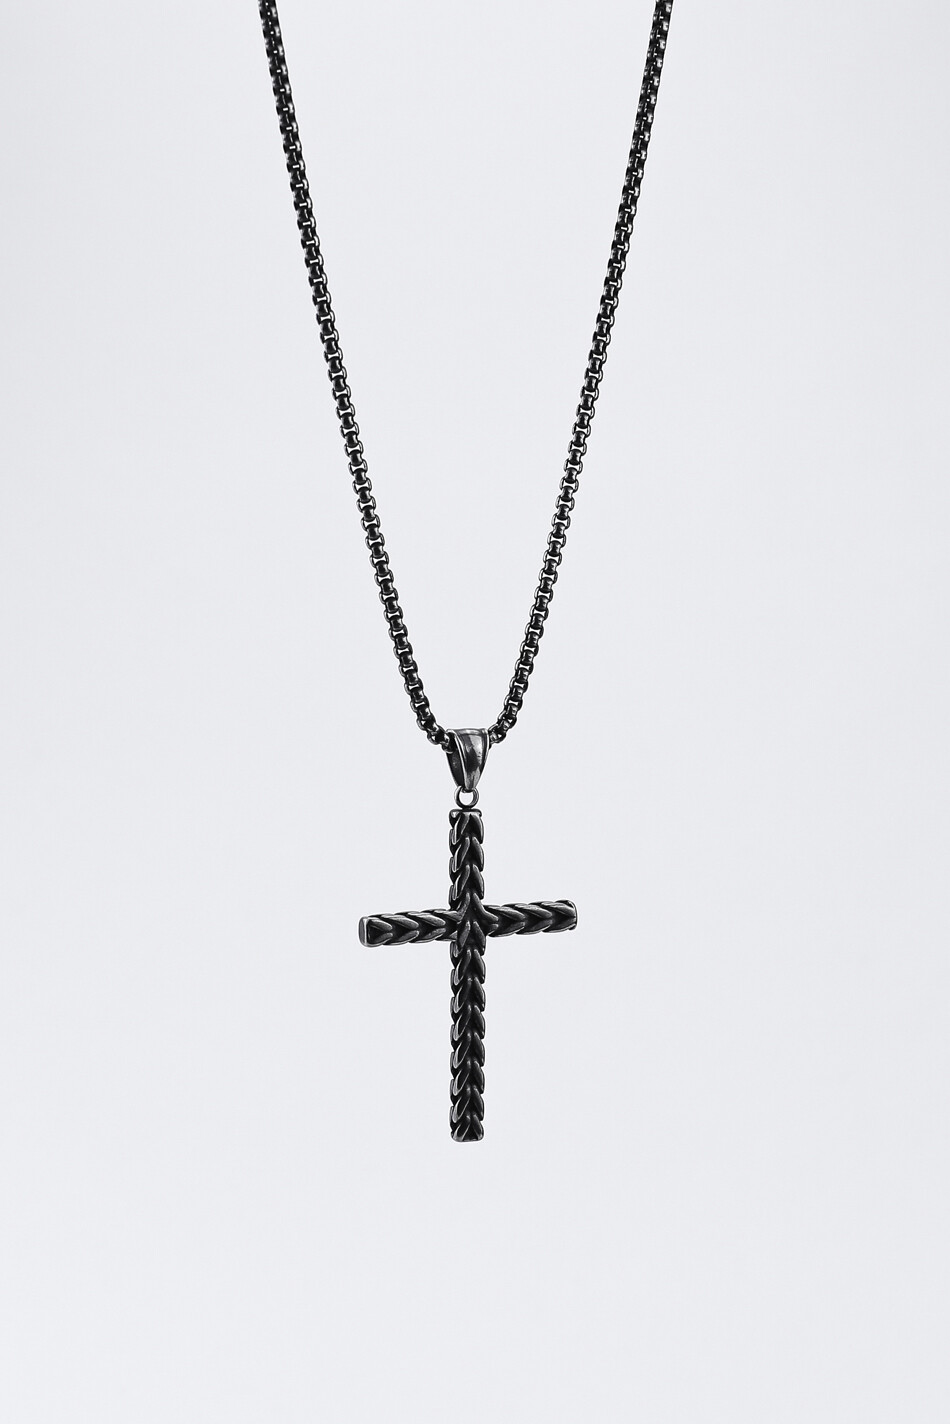 Chain with a "Cross - braid" pendant